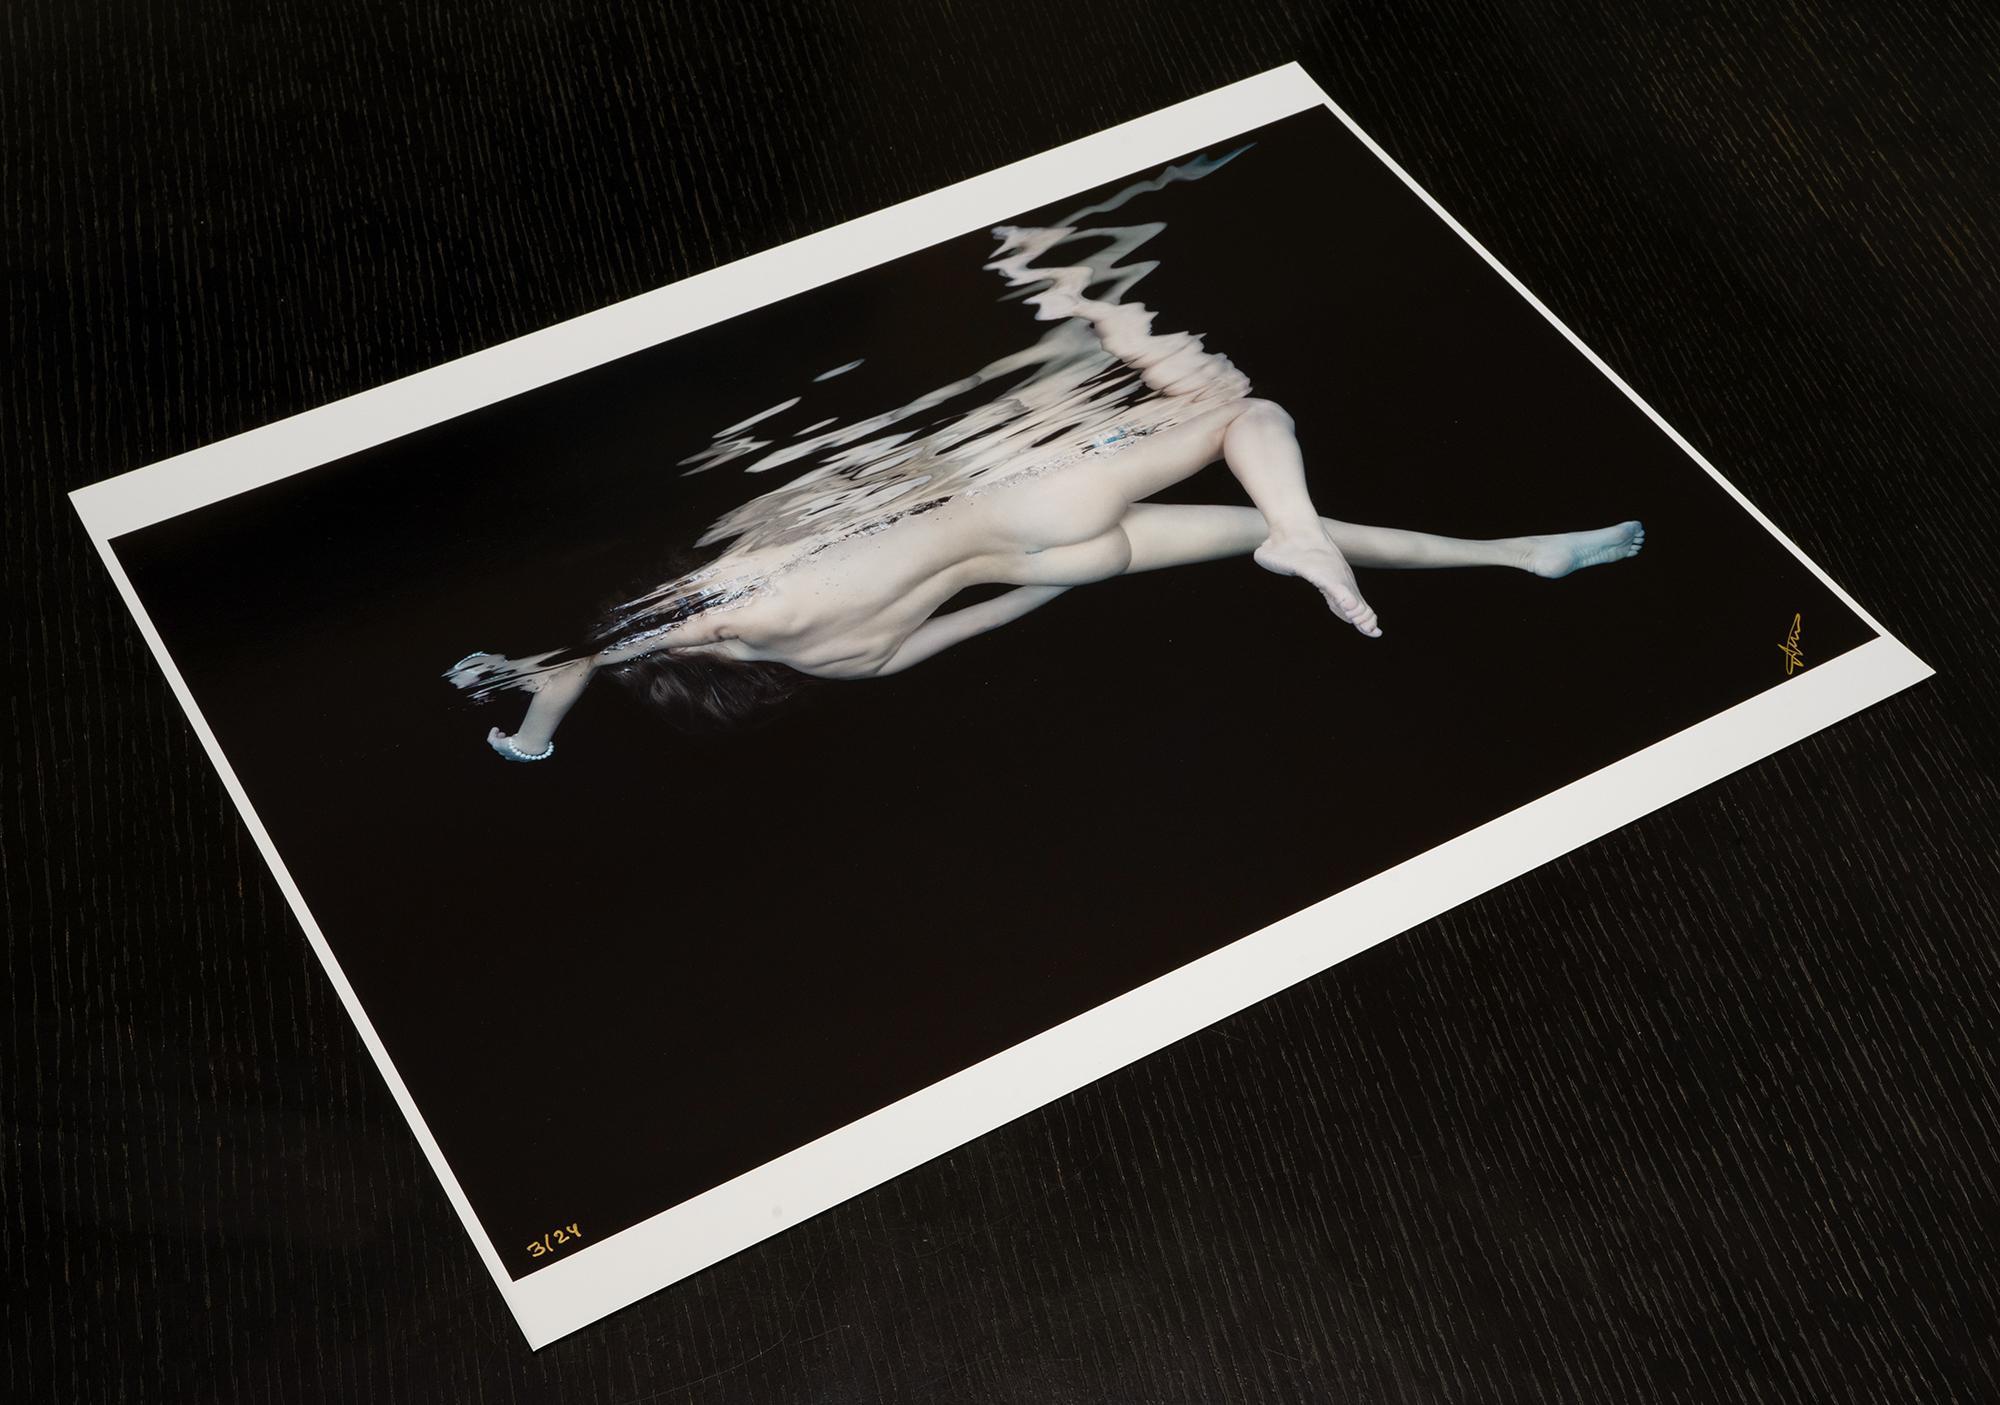 Porcelain II  - underwater nude photograph - print on paper 36